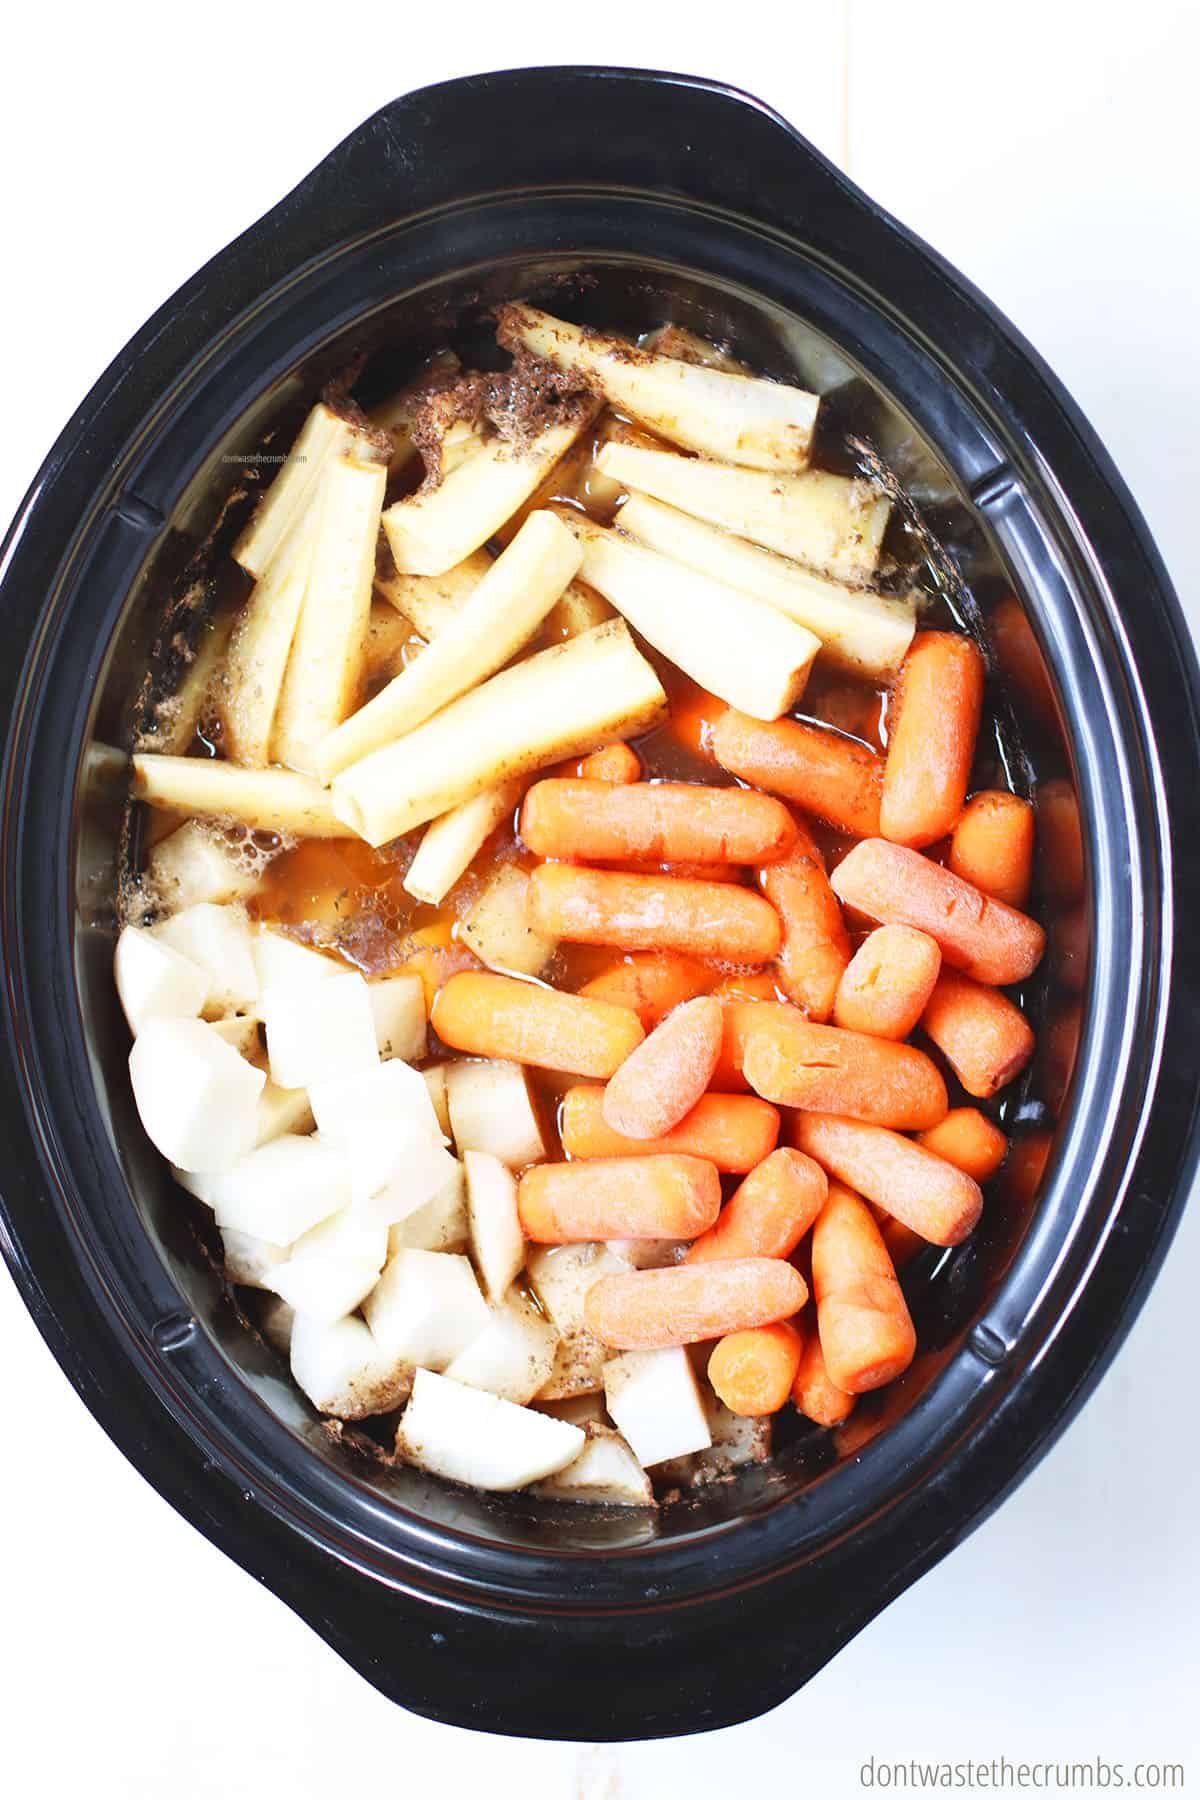 There is cut turnips, parsnips, carrots, and beef stock in the crock pot.